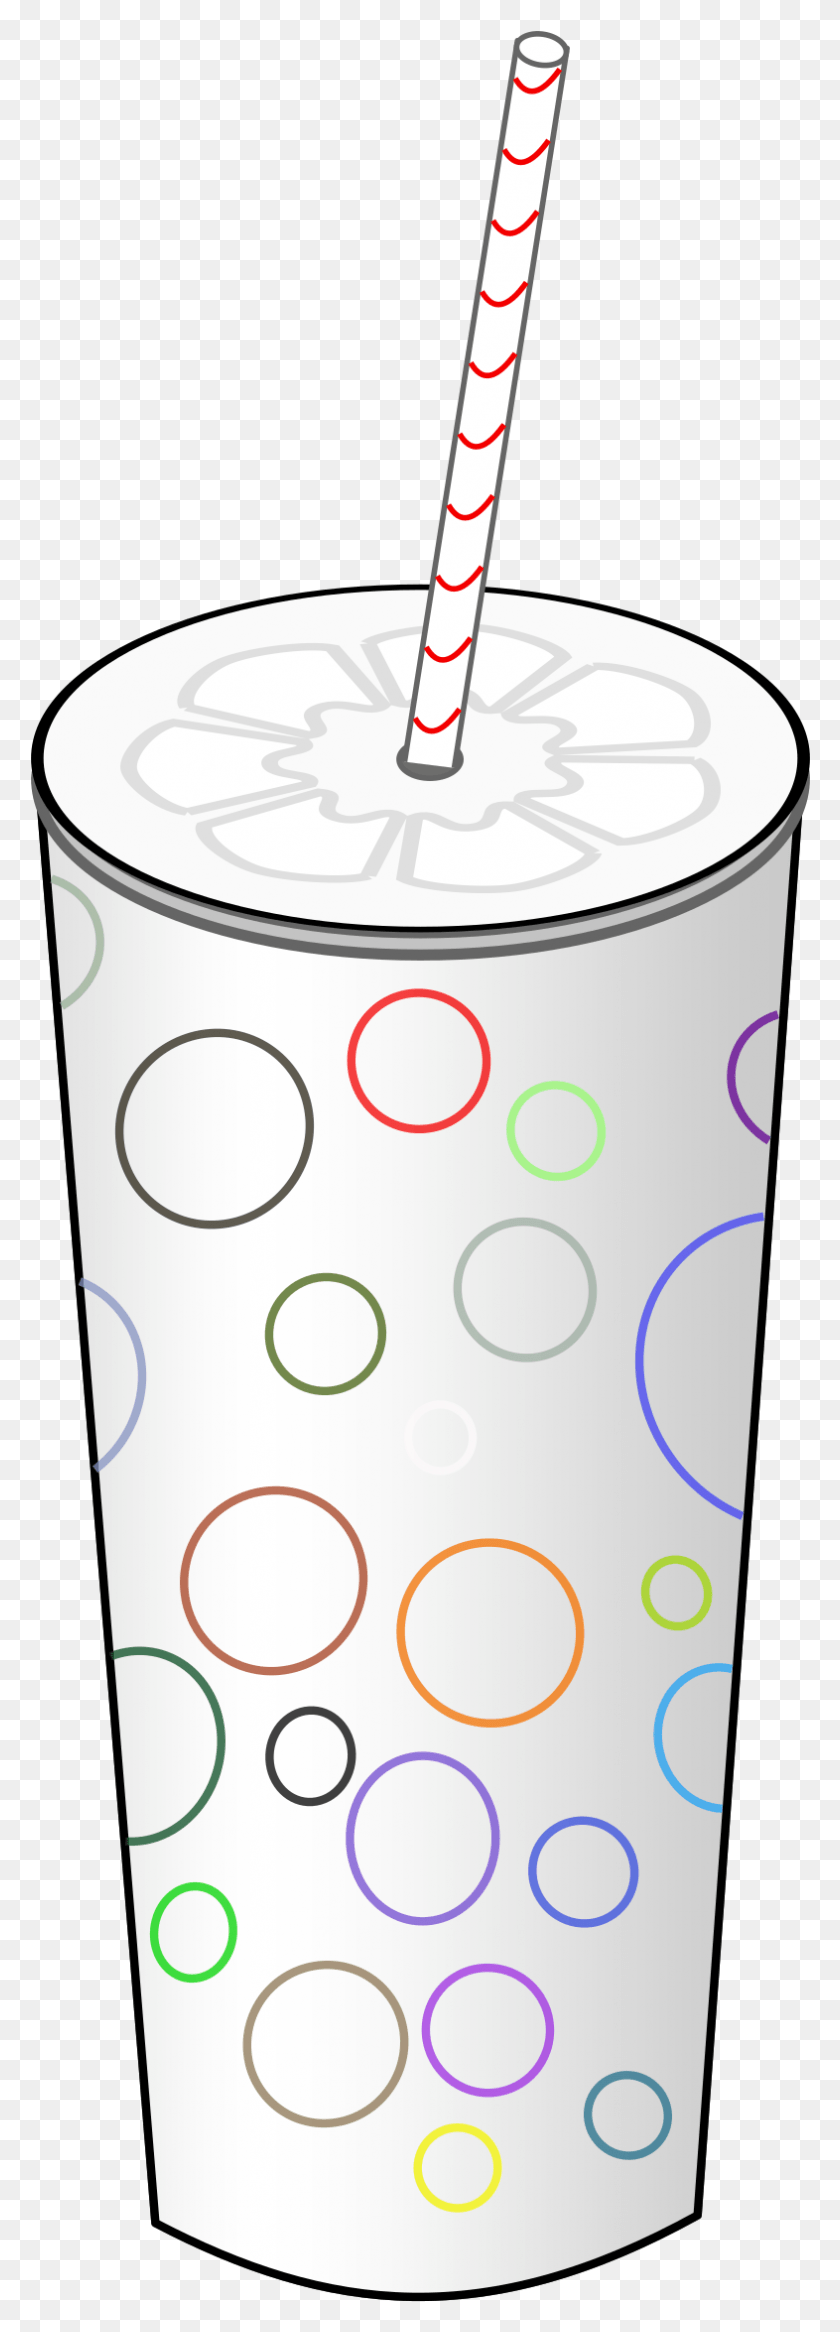 786x2290 This Free Icons Design Of Paper Cup Circle, Estaño, Aluminio, Lata Hd Png